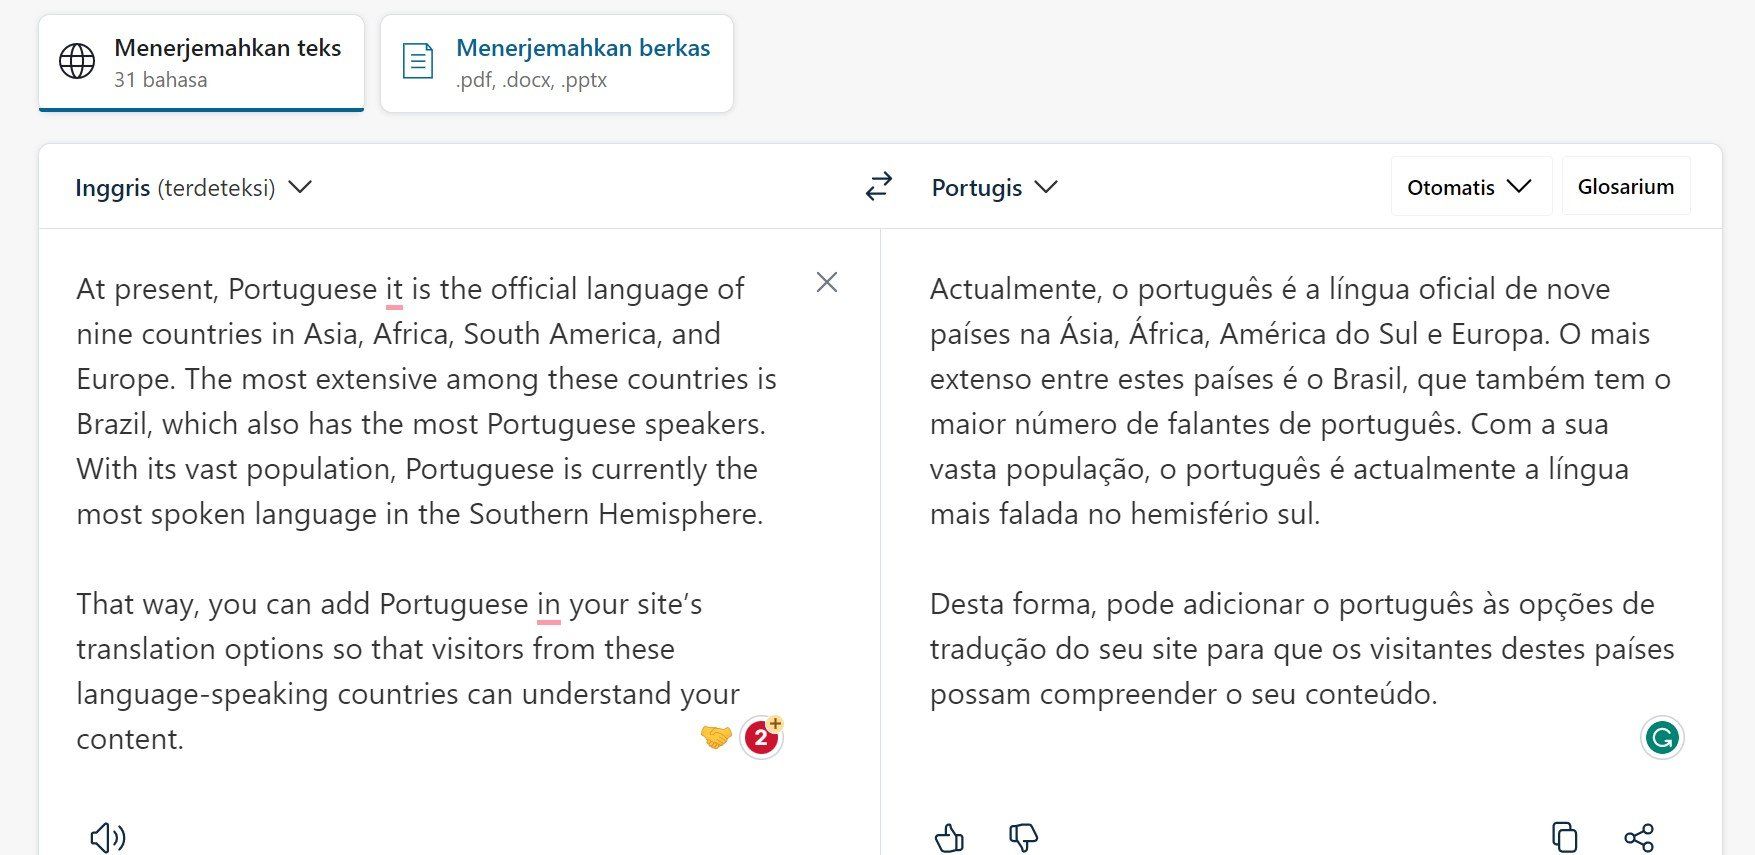 How to translate a website in Portuguese language - translation with DeepL